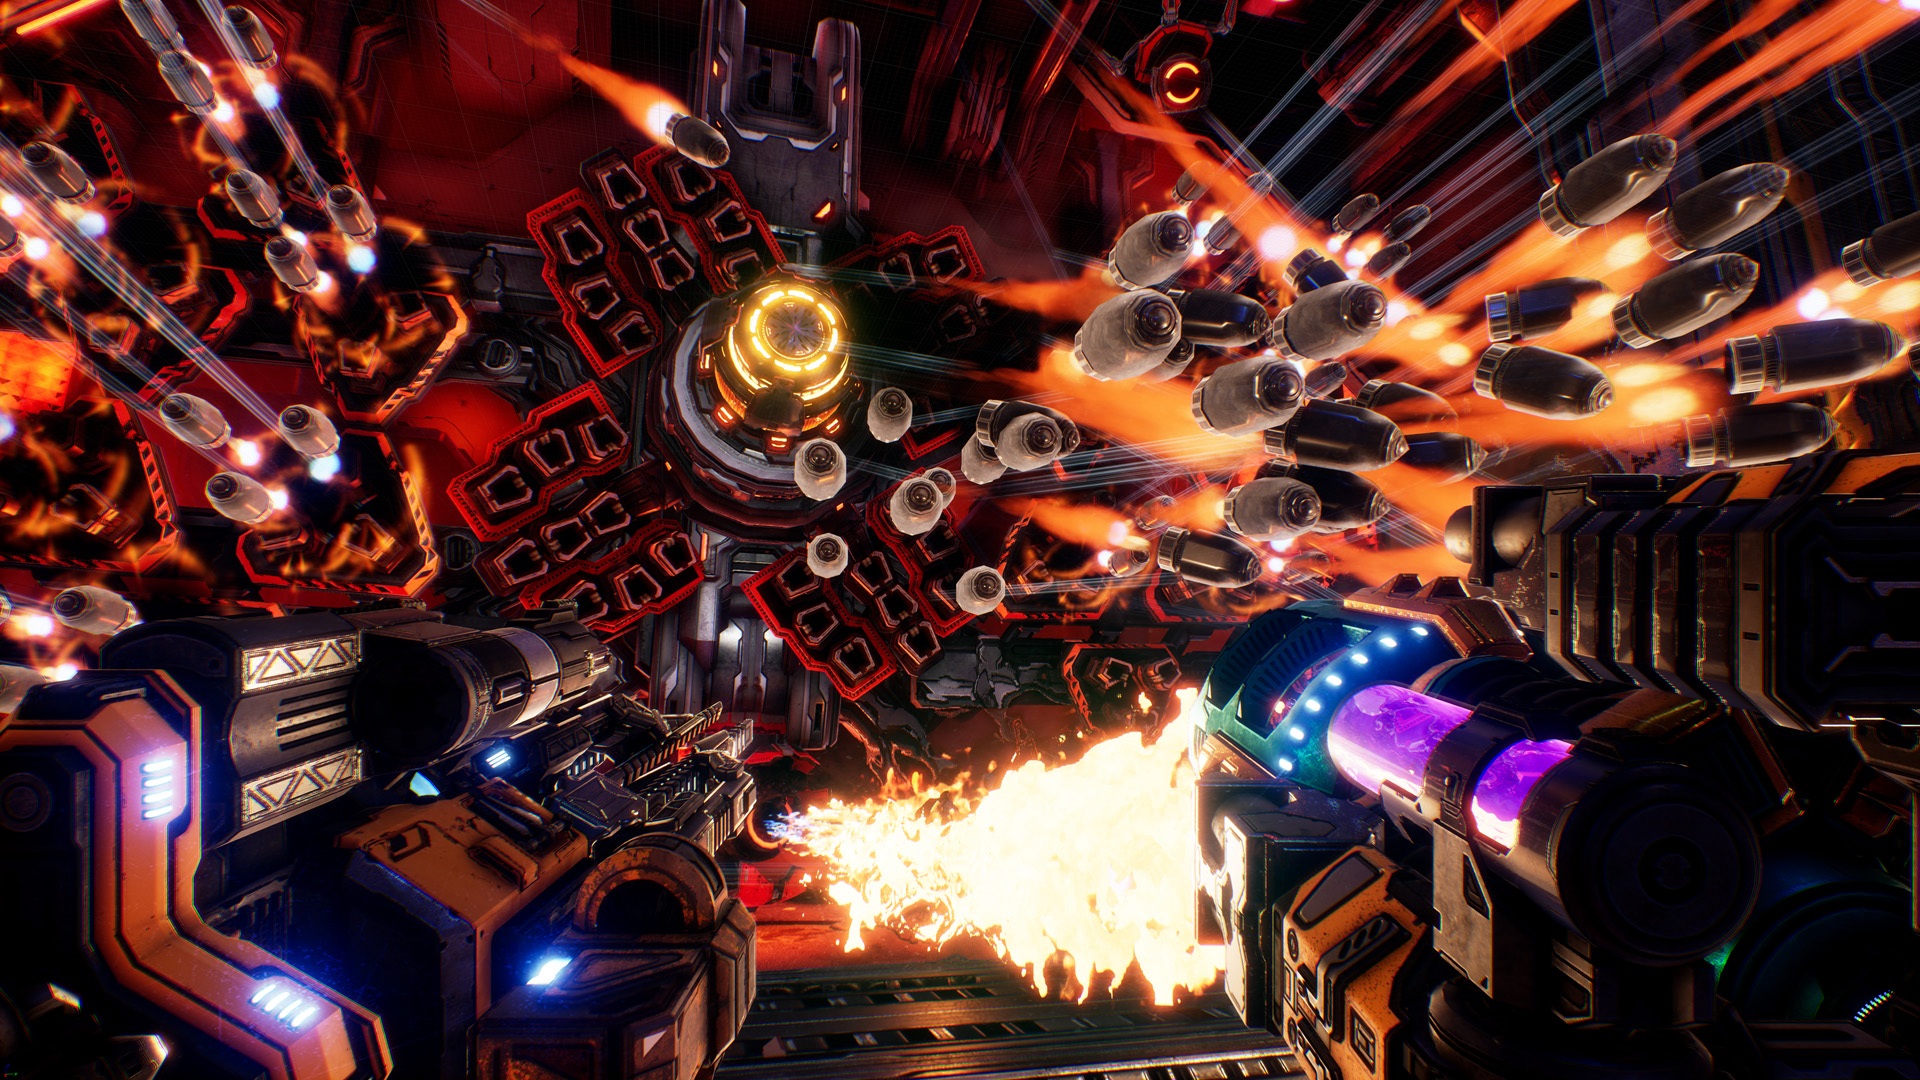 Find the best computers for MOTHERGUNSHIP